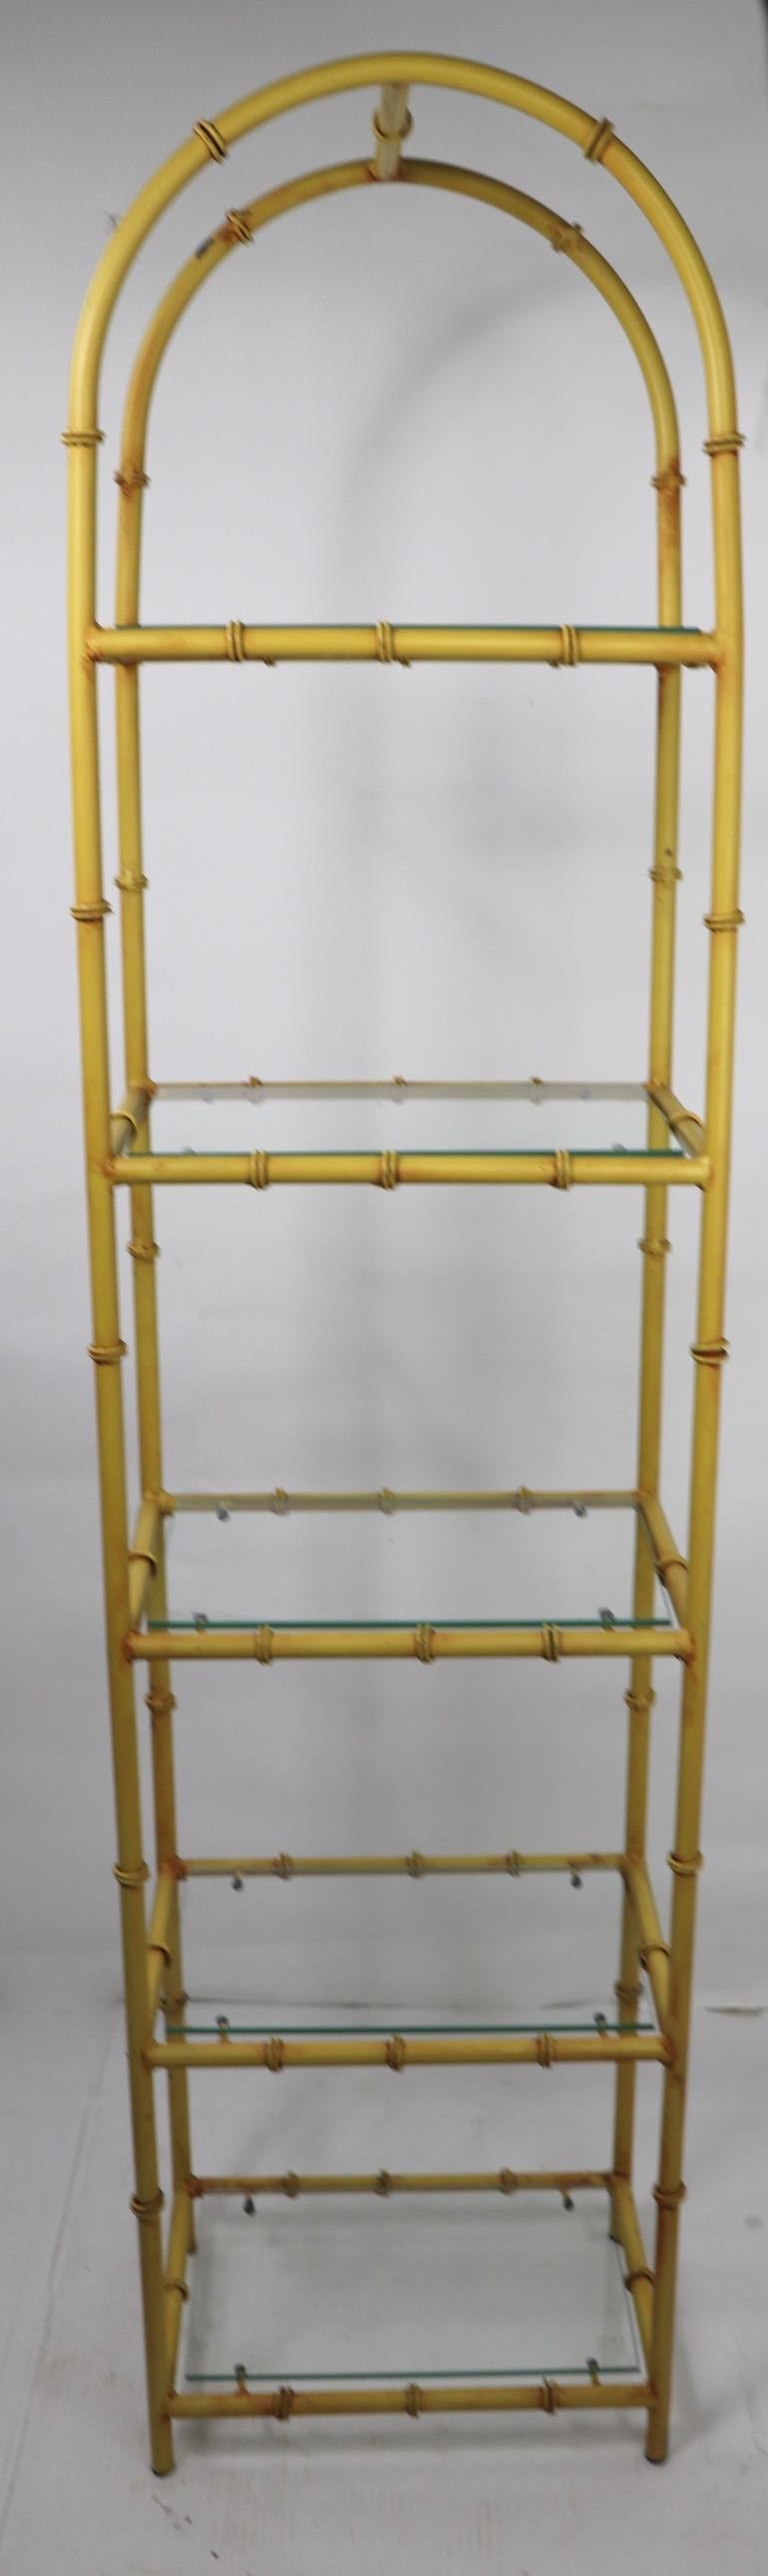 Stylish five shelf etagere having a faux bamboo iron frame, with glass shelves. Each shelf is 15.25 inch W x 10 inch deep, with 13 inches between each shelf.